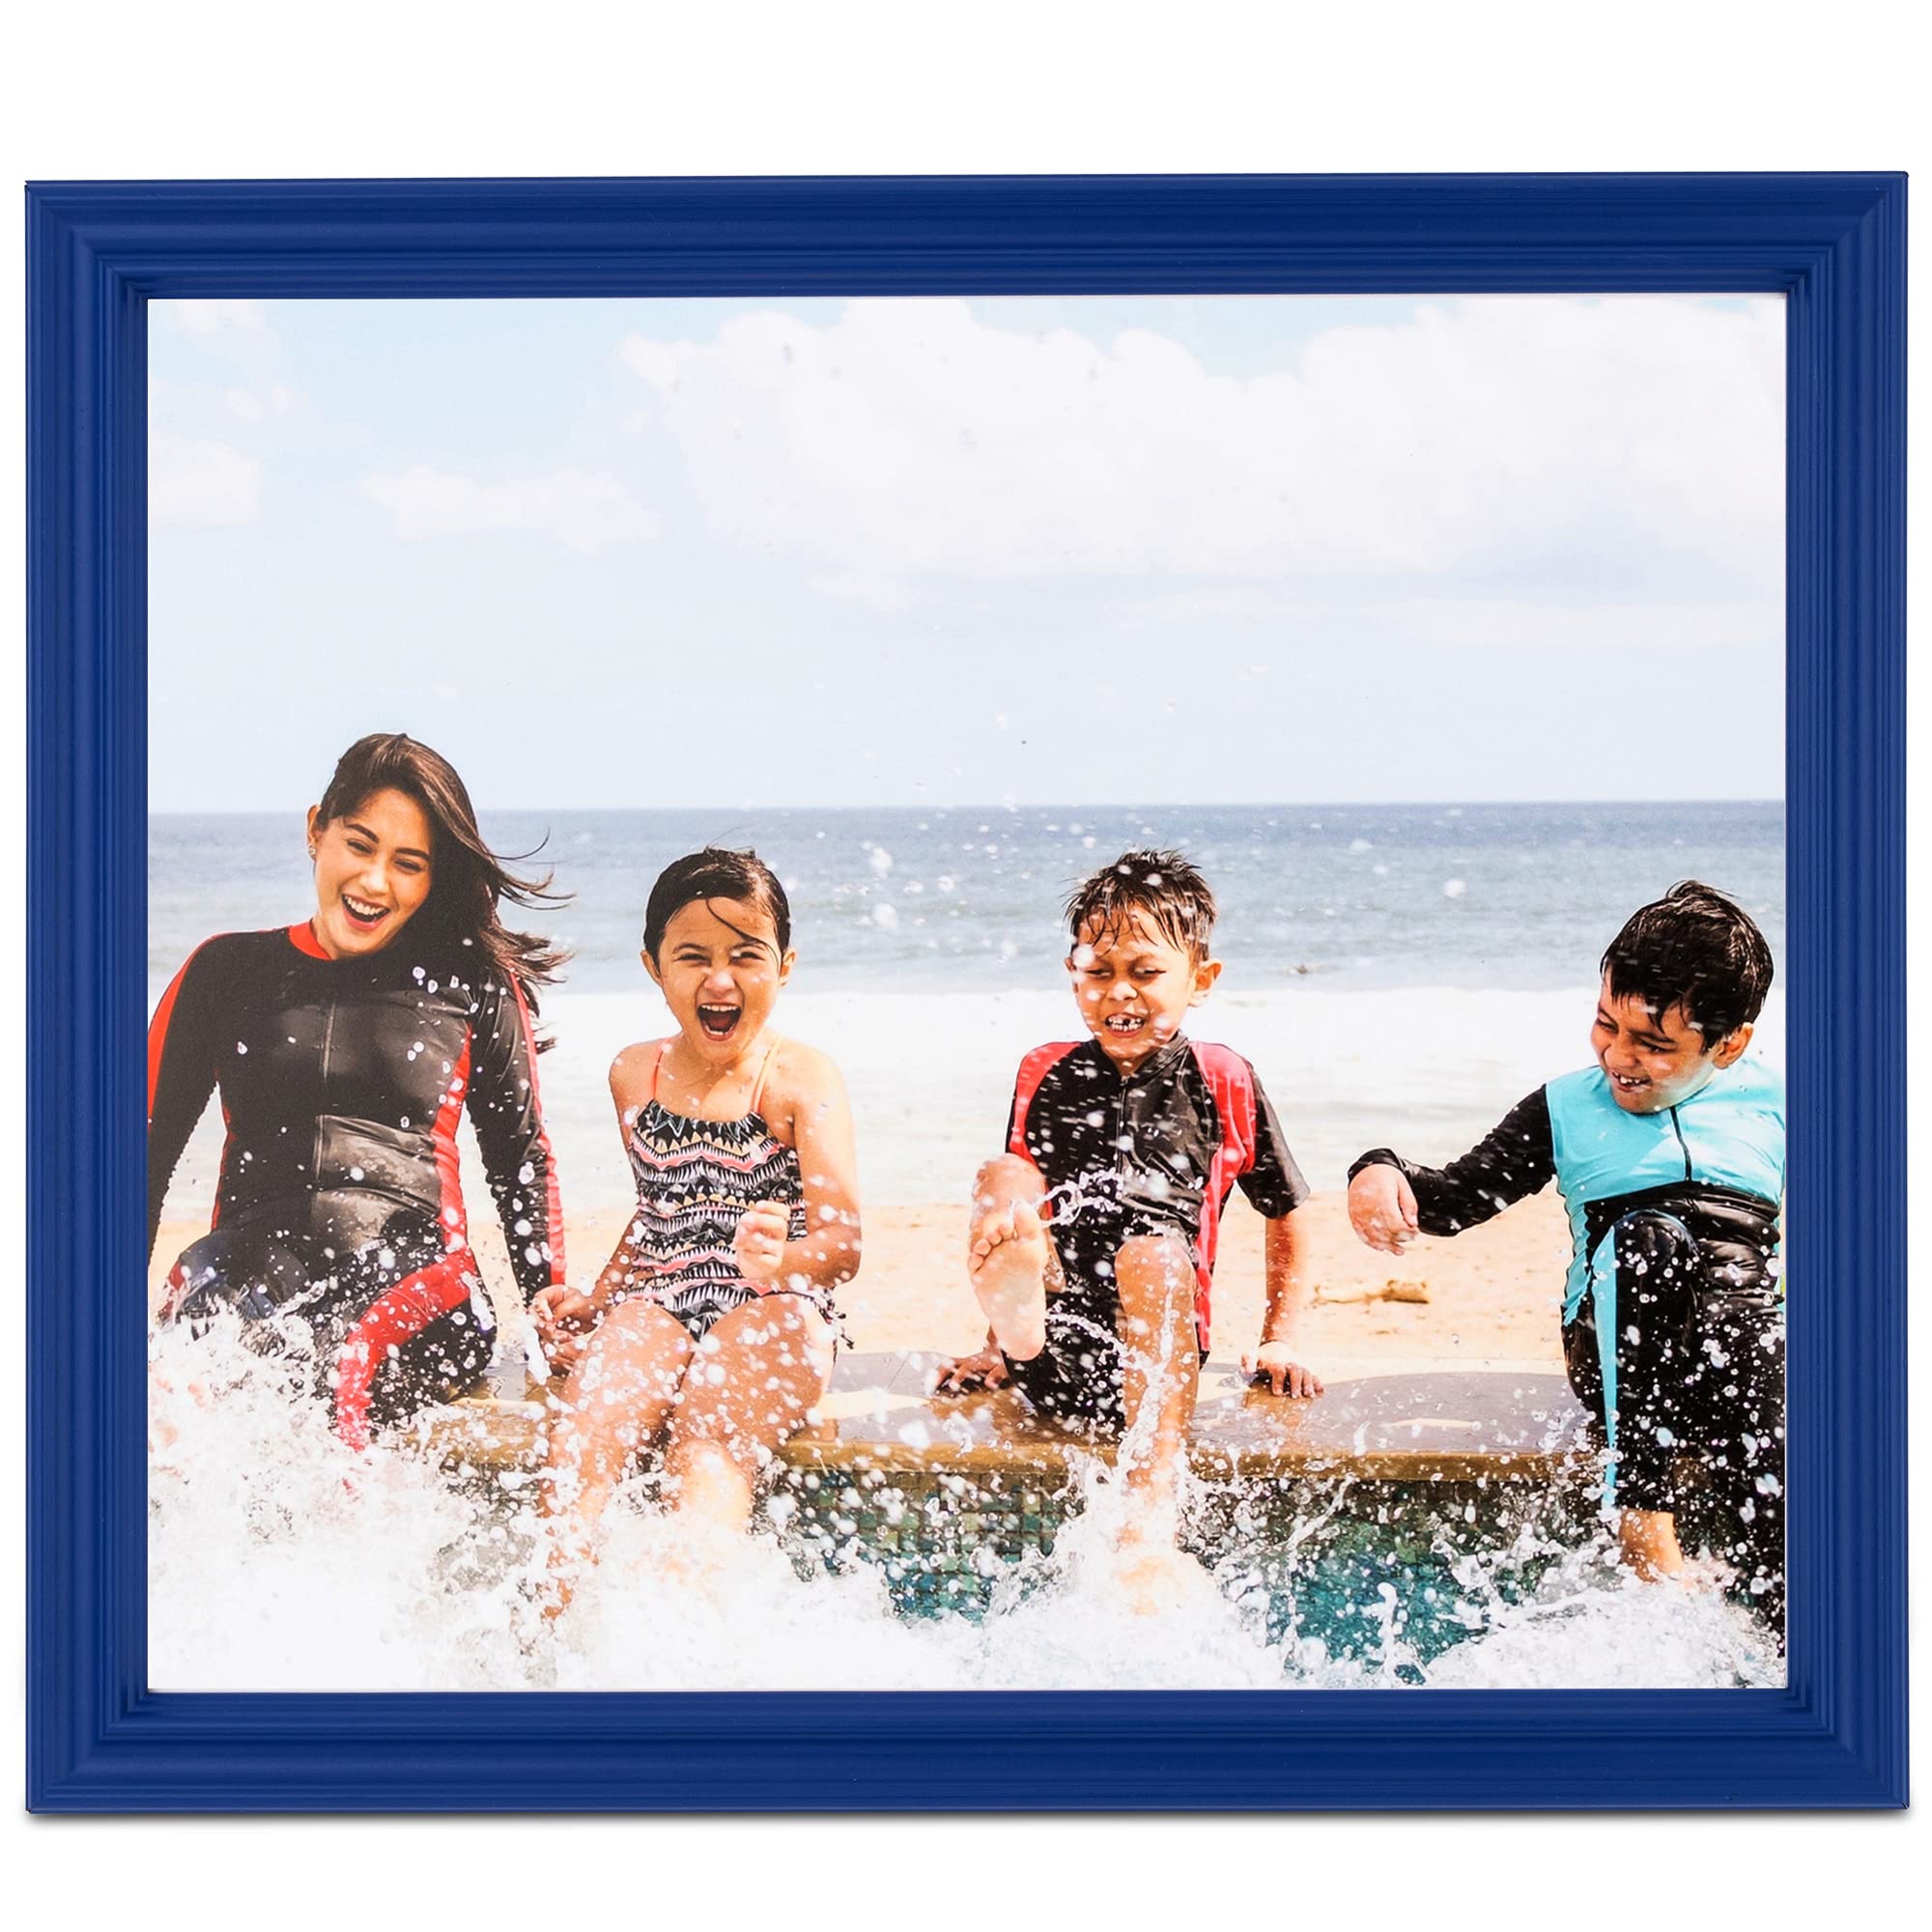 ArtToFrames 20x30 Inch Blue Picture Frame, This 1 Inch Custom Wood Poster Frame is Blue - Comes with Foam Backing 3/16 inch and Regular Plexi Glass...